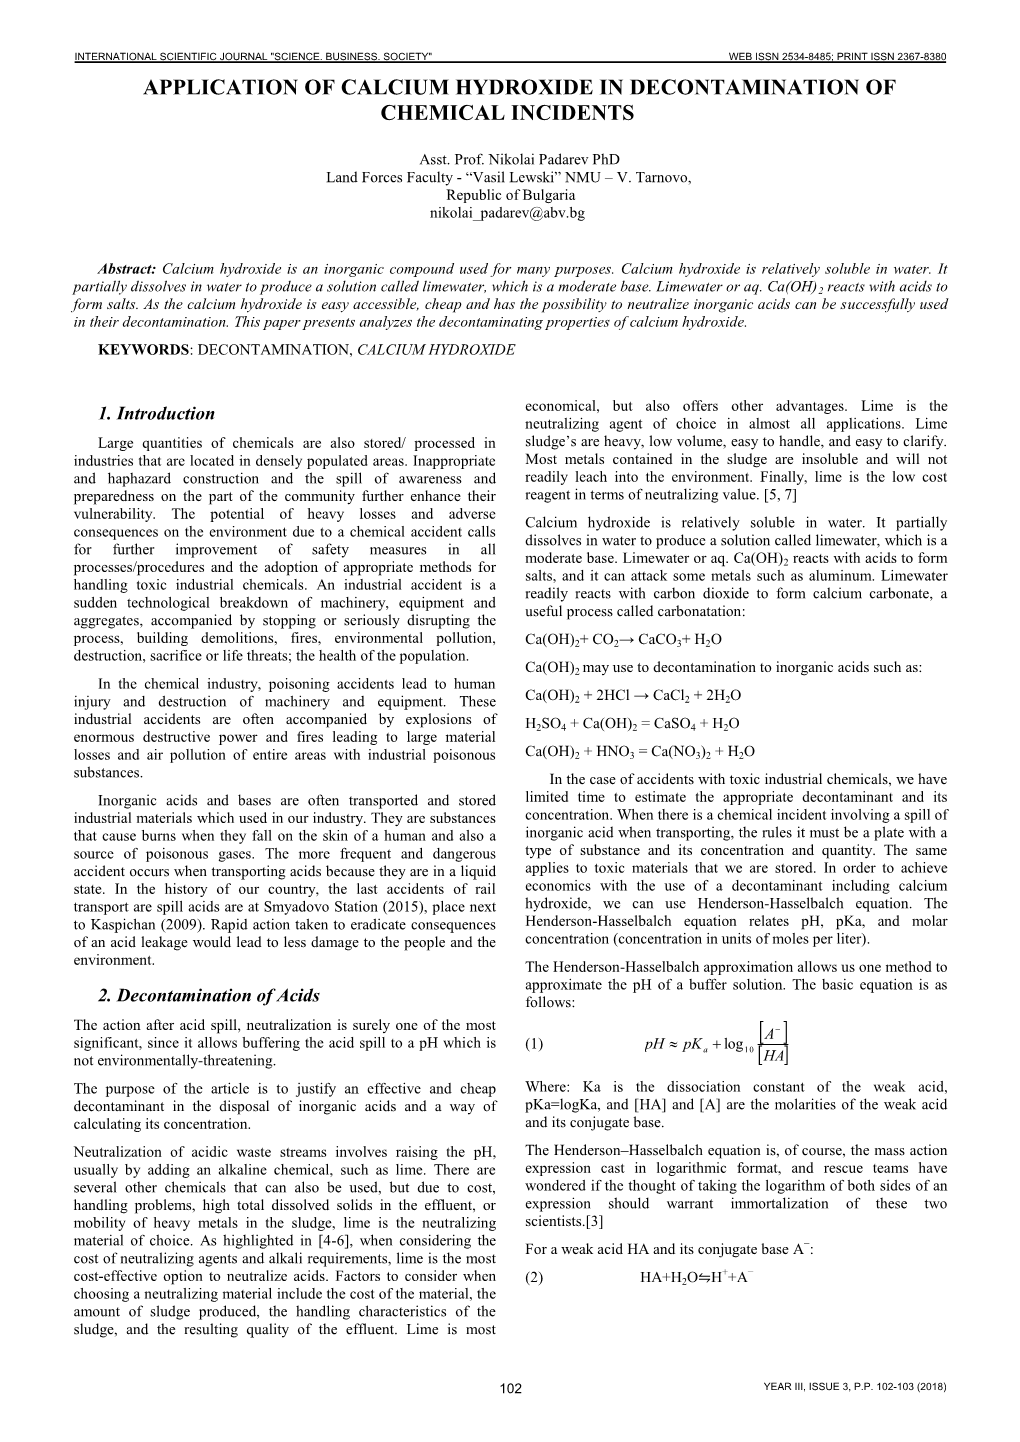 Application of Calcium Hydroxide in Decontamination of Chemical Incidents